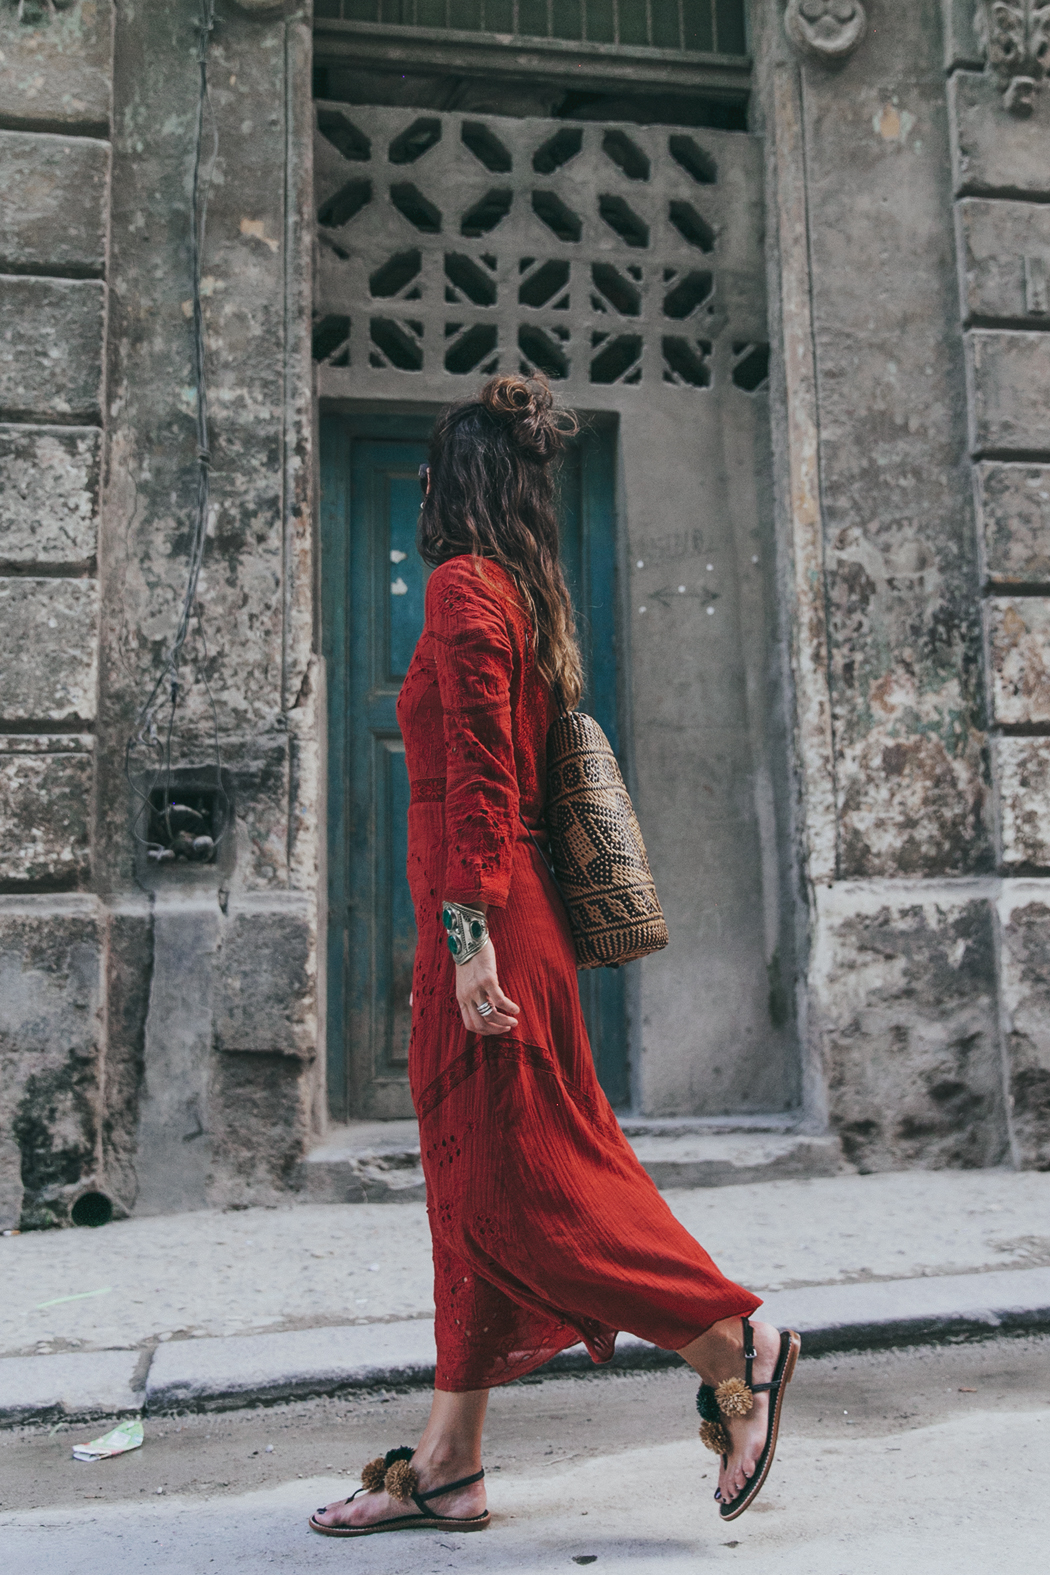 Cuba-La_Habana_Centro-Red_Dress-PomPom_Sandals-Backpack-Sreetstyle-Half_Knot_Hairstyle-Outfit-2